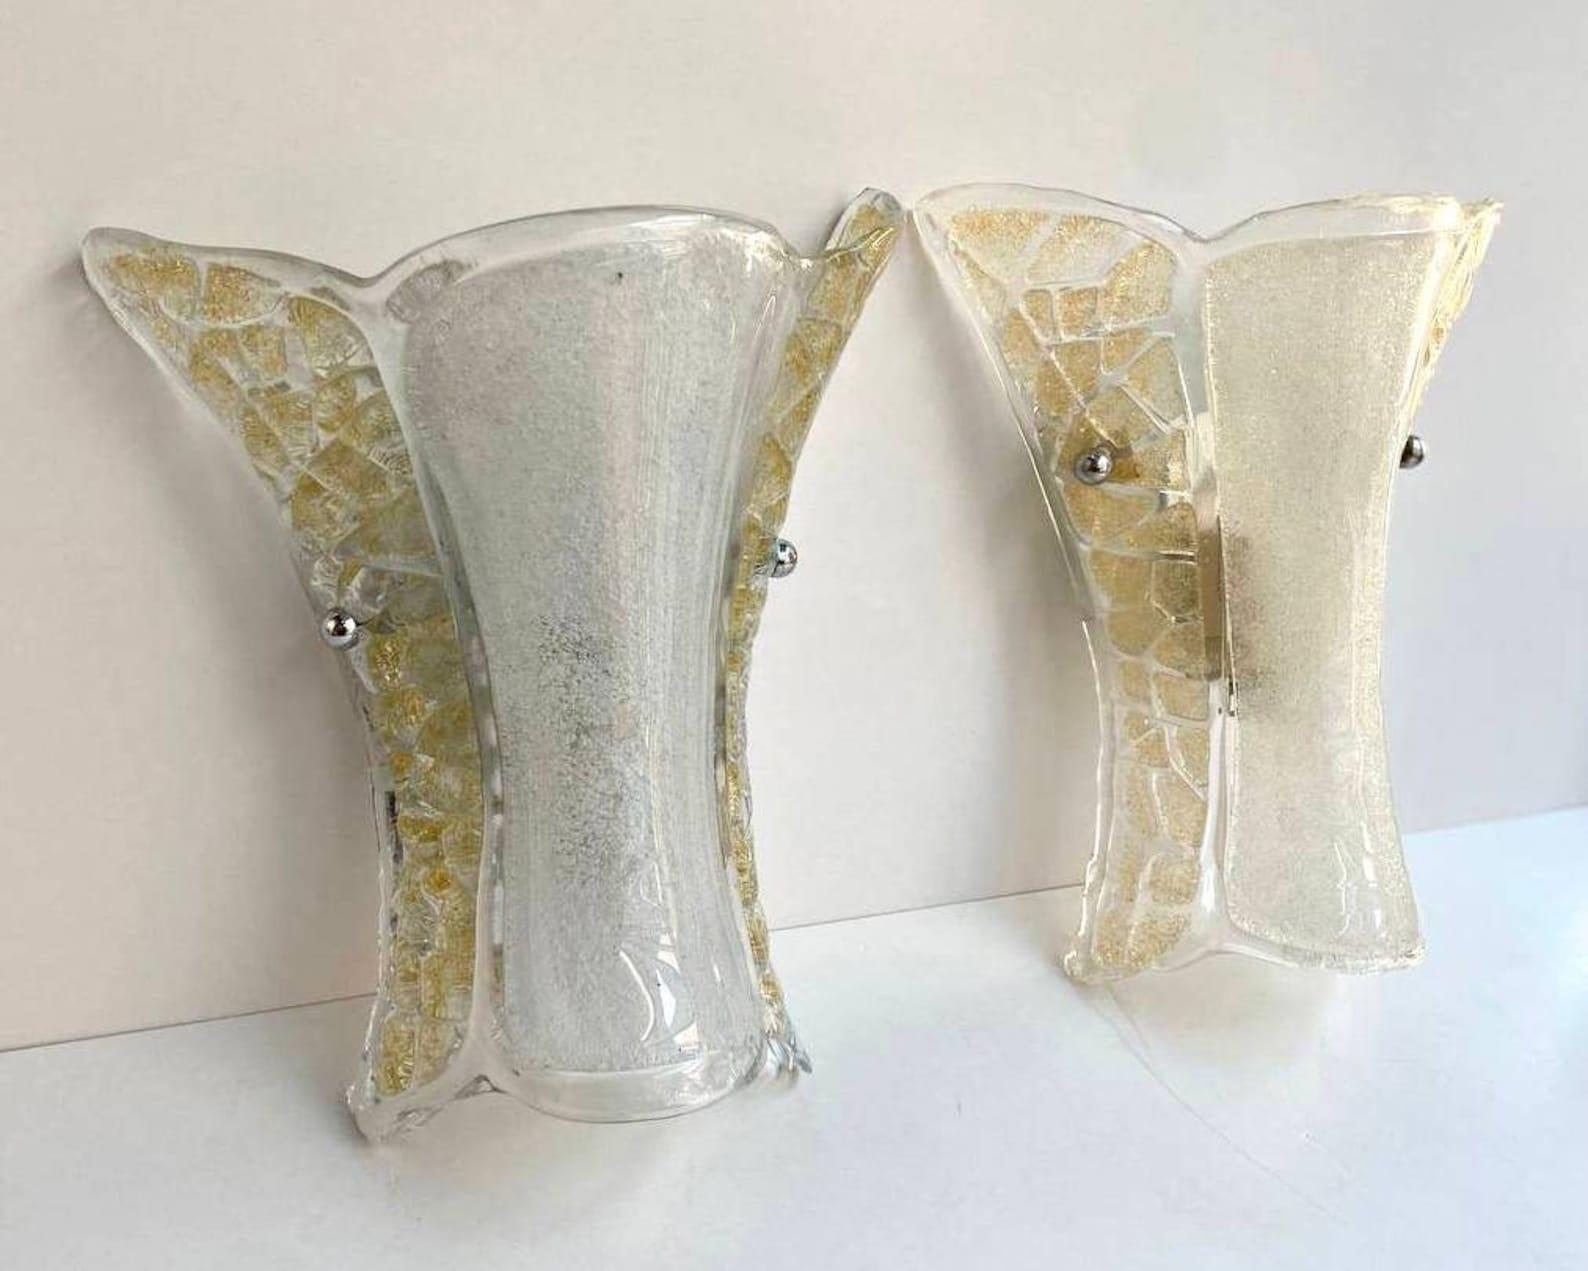 Italian Vintage Murano Glass Set of Wall Sconces by Venini, 1970s For Sale